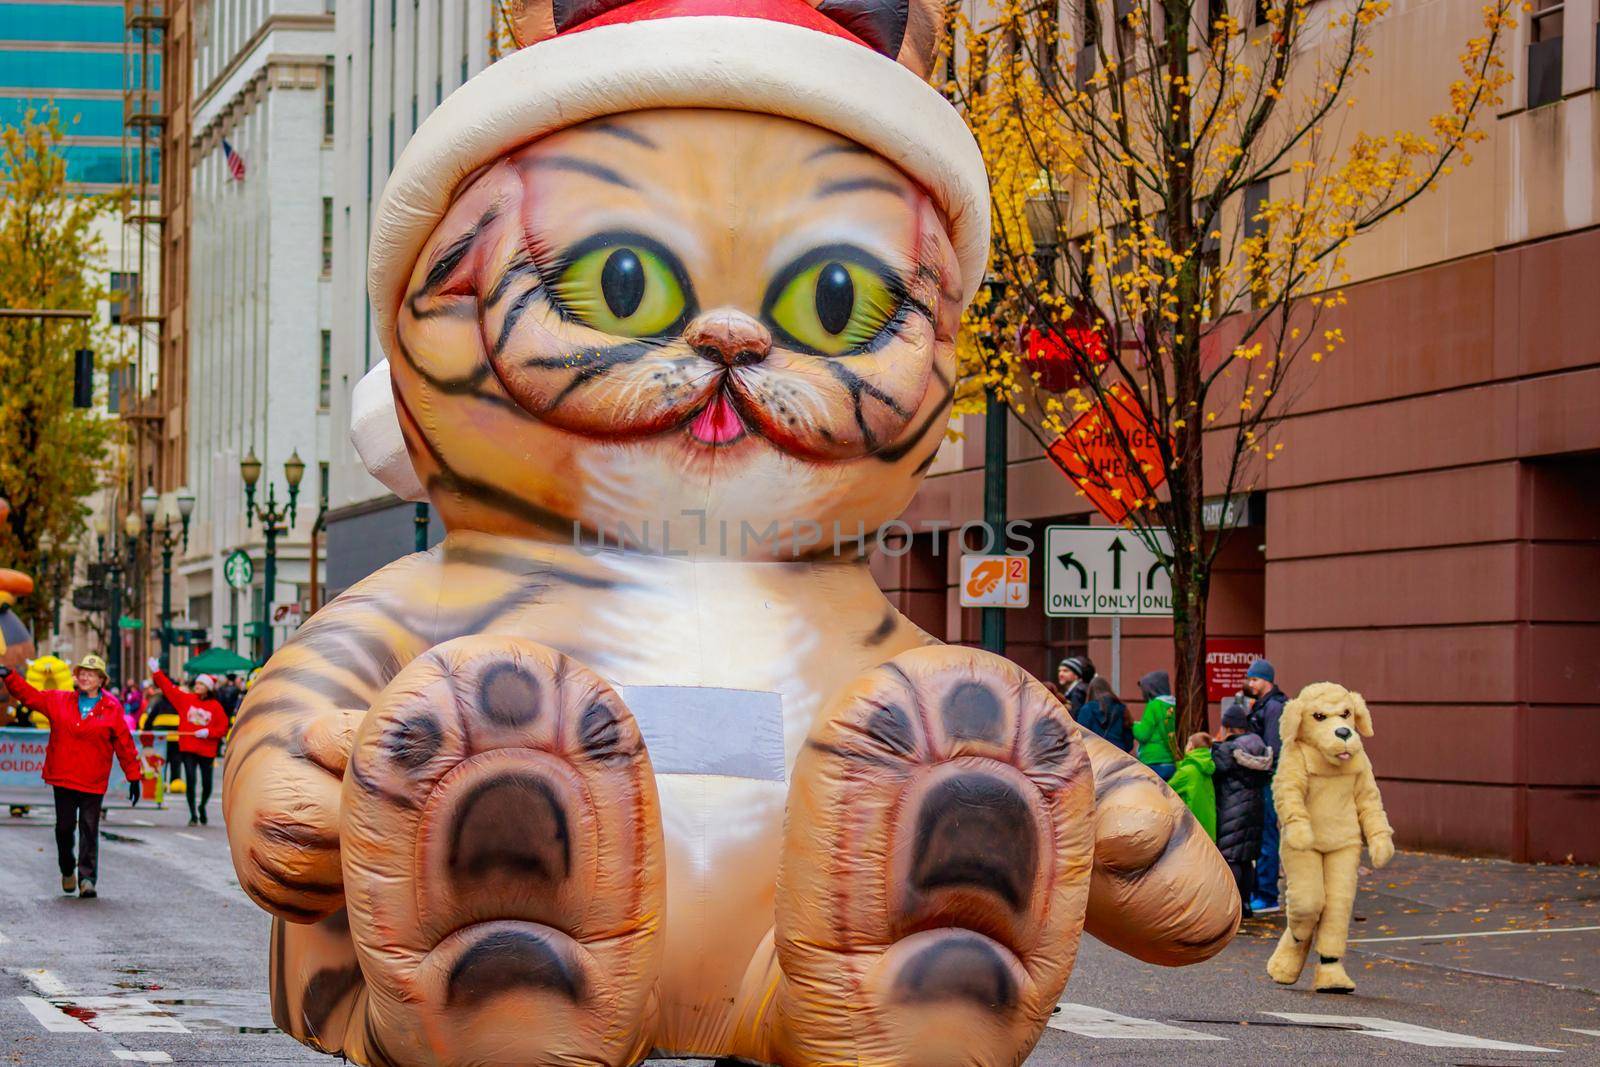 Portland, Oregon, USA - November 25, 2016: Giant cat float marches in the annual My Macy's holiday Parade across Portland Downtown.